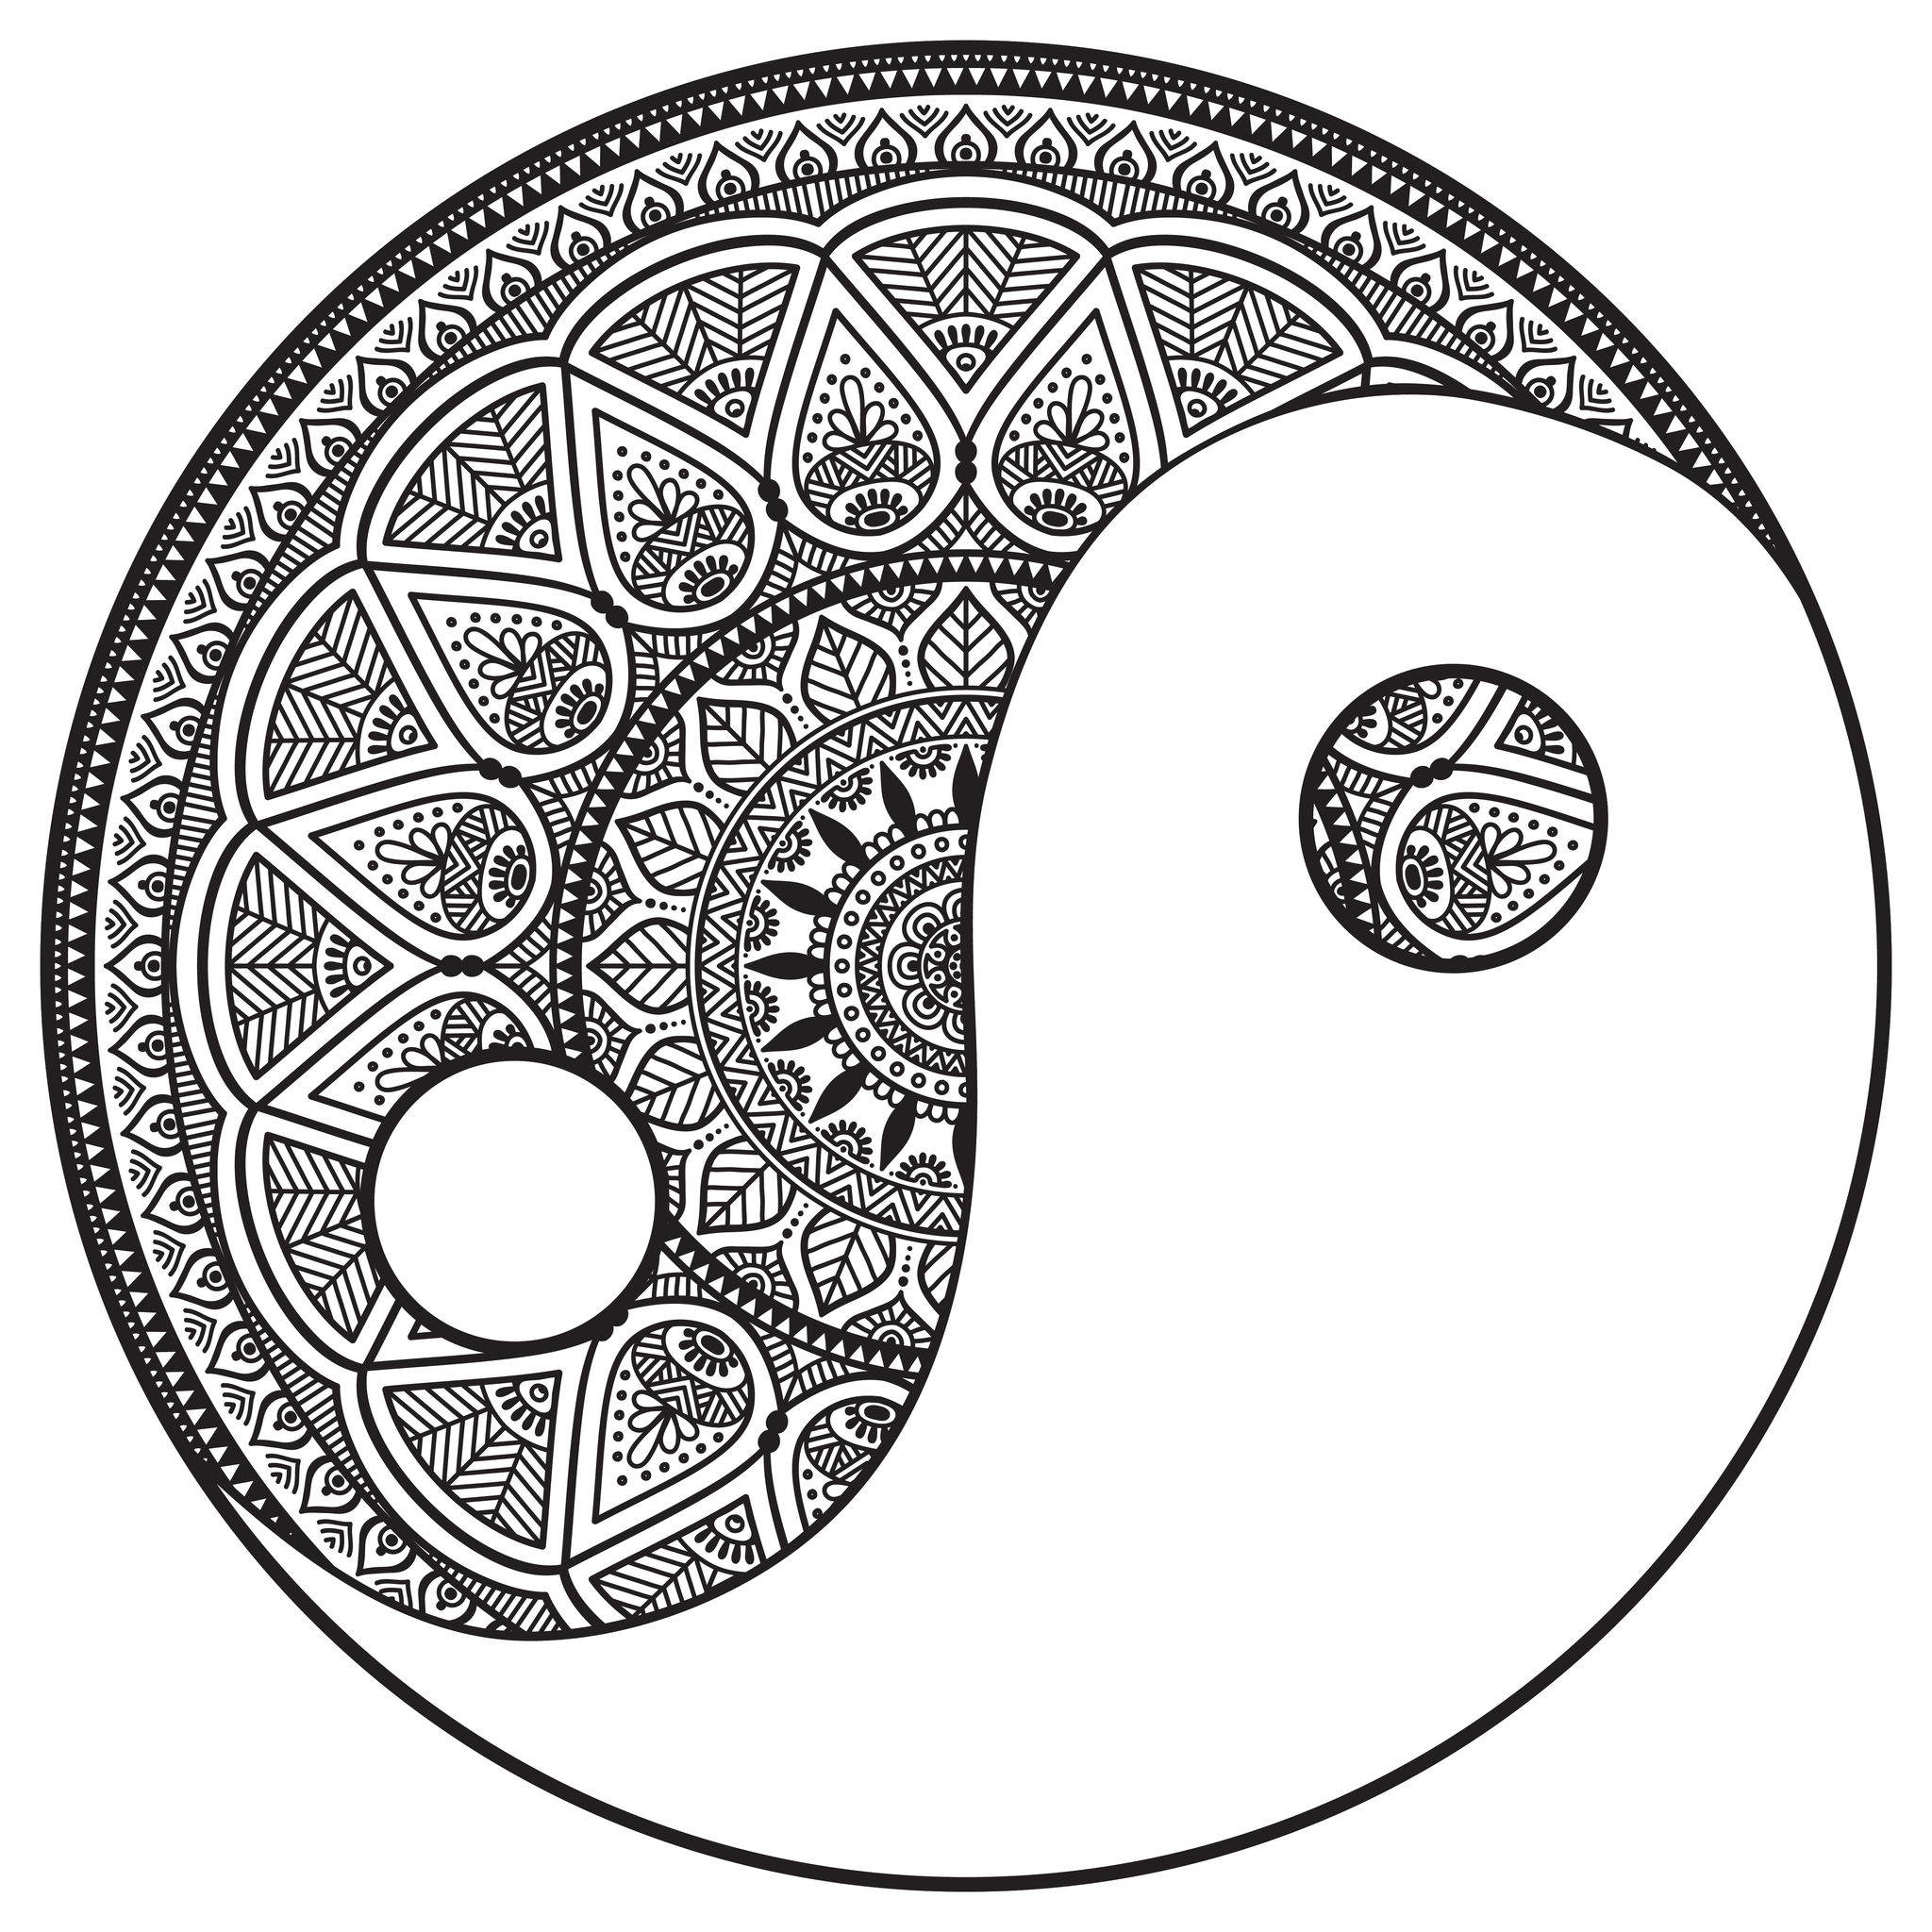 Download Mandala Yin and Yang to color - M&alas Adult Coloring Pages